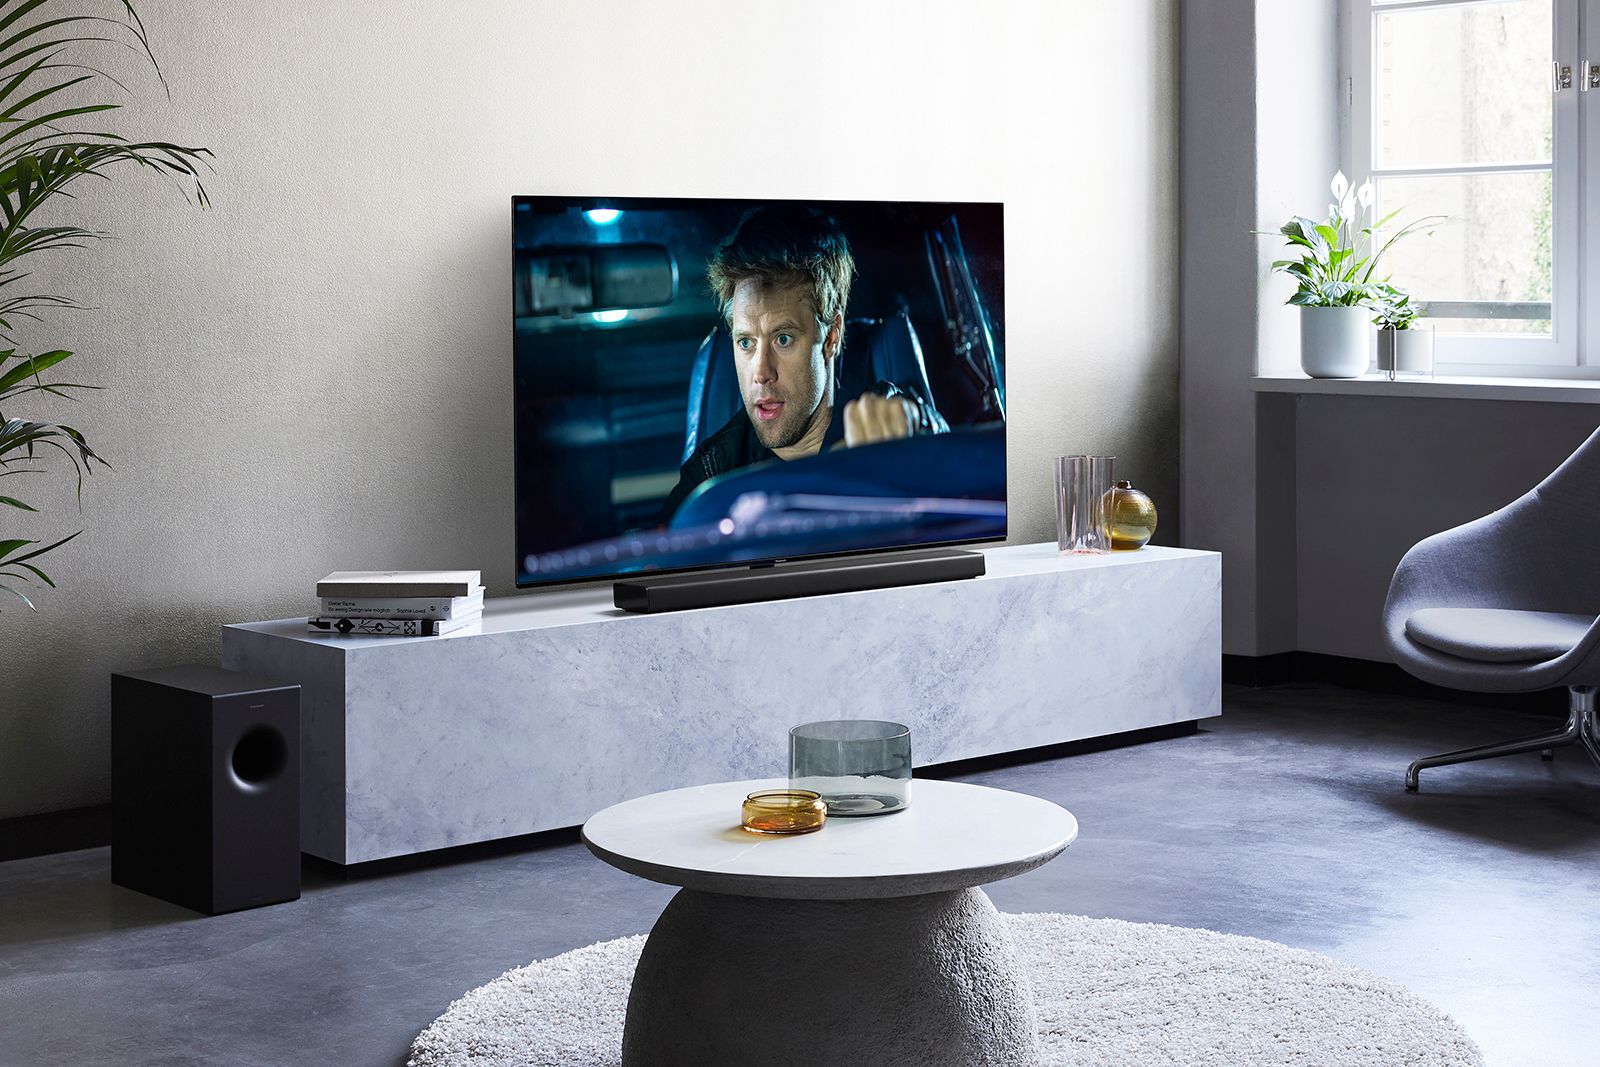 Panasonic HTB600 soundbar with wireless subwoofer announced joined by HTB400 in range image 1